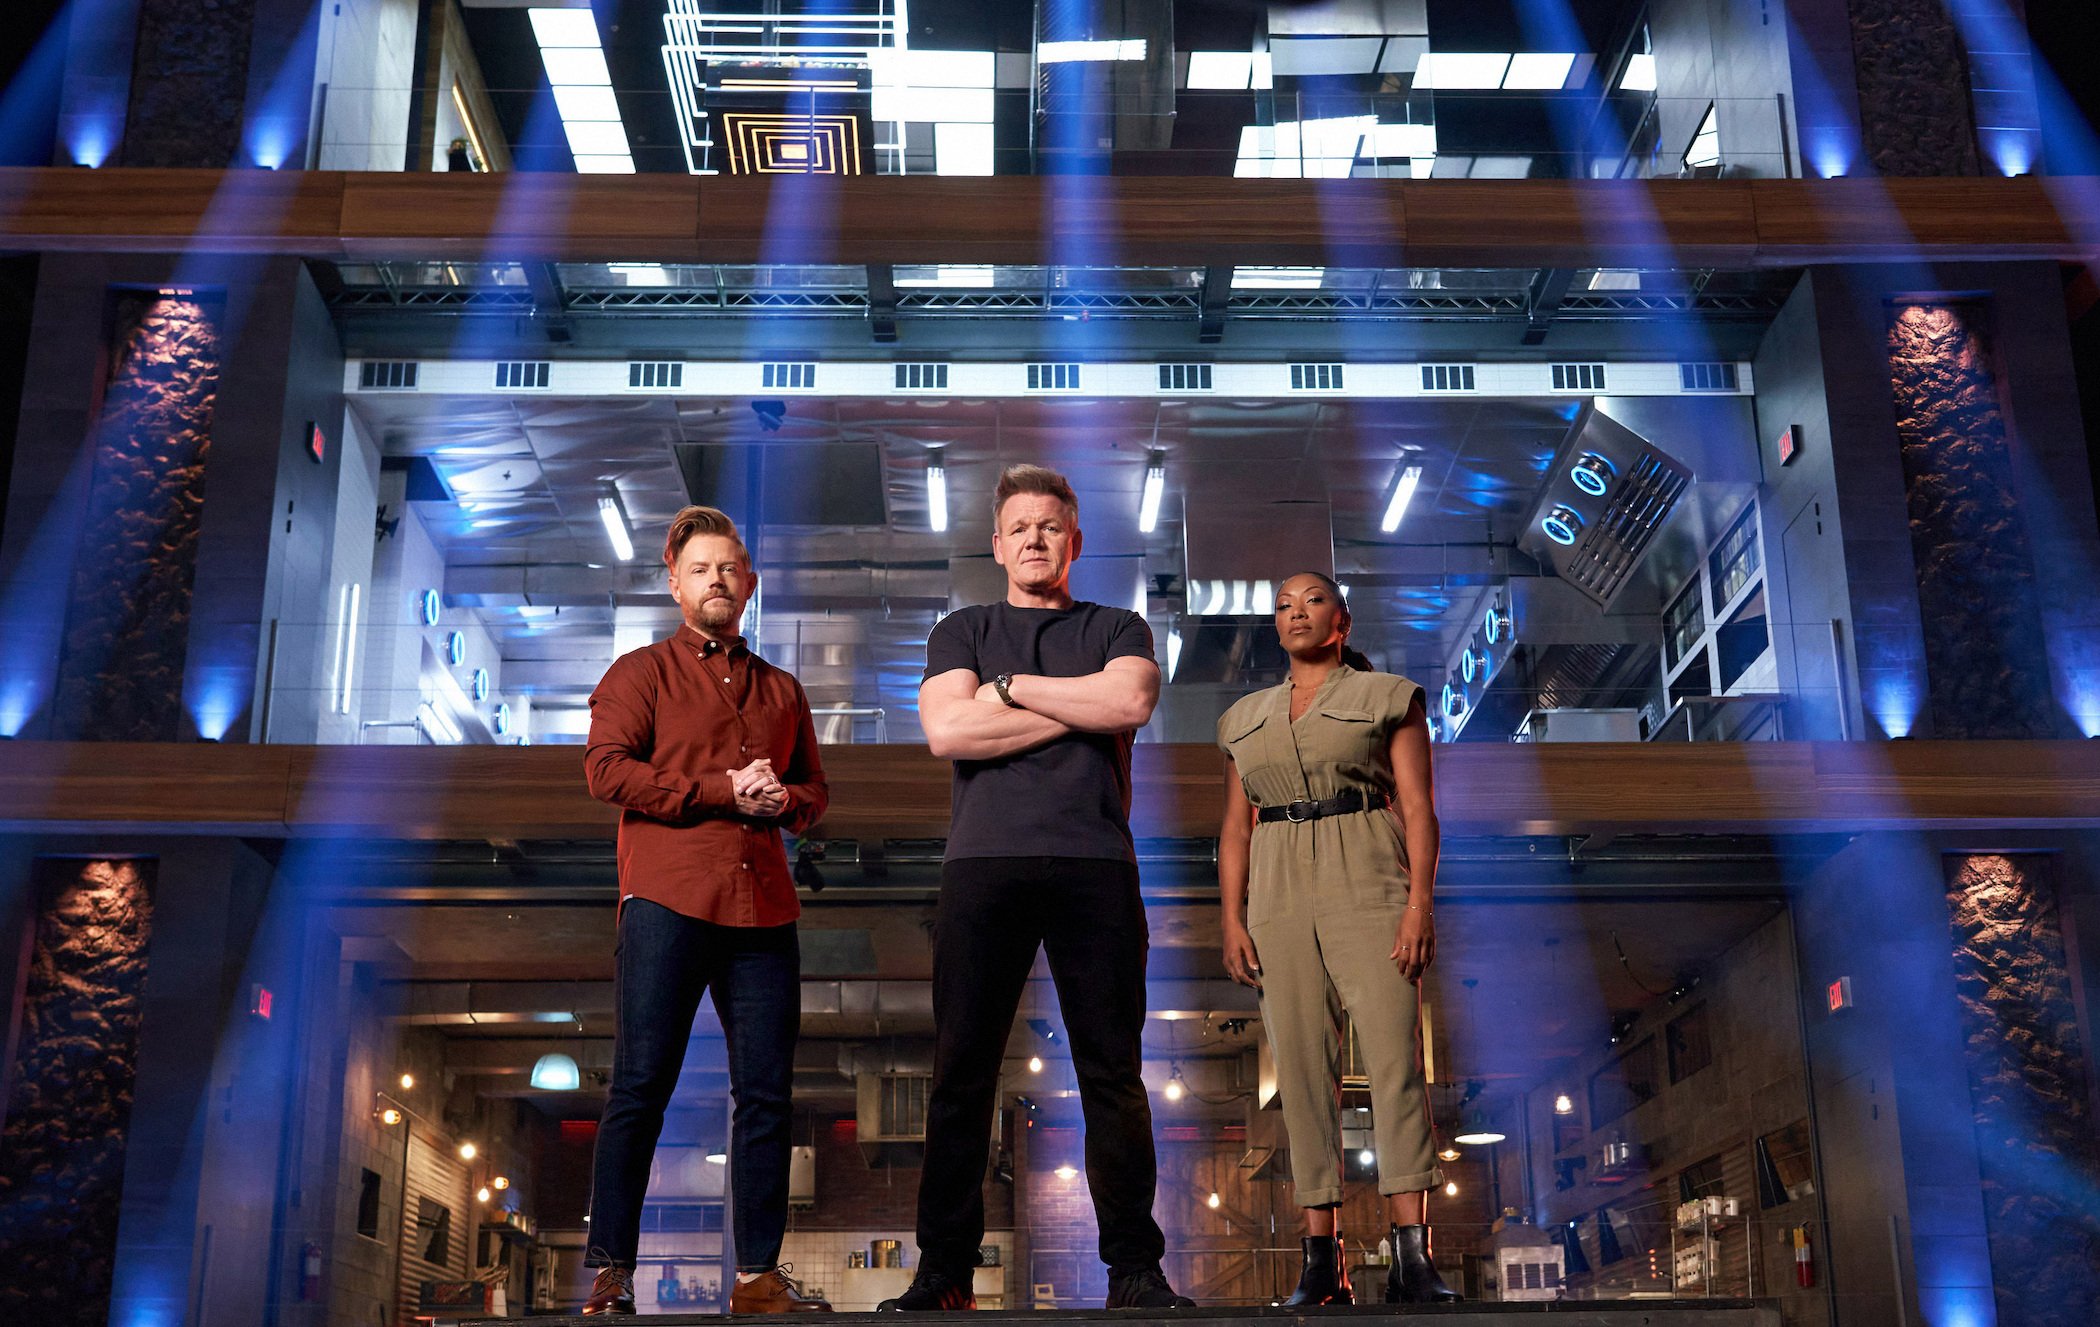 Richard Blais, Gordon Ramsay, and Nyesha Arrington standing together in front of the 'Next Level Chef' three-tiered kitchen